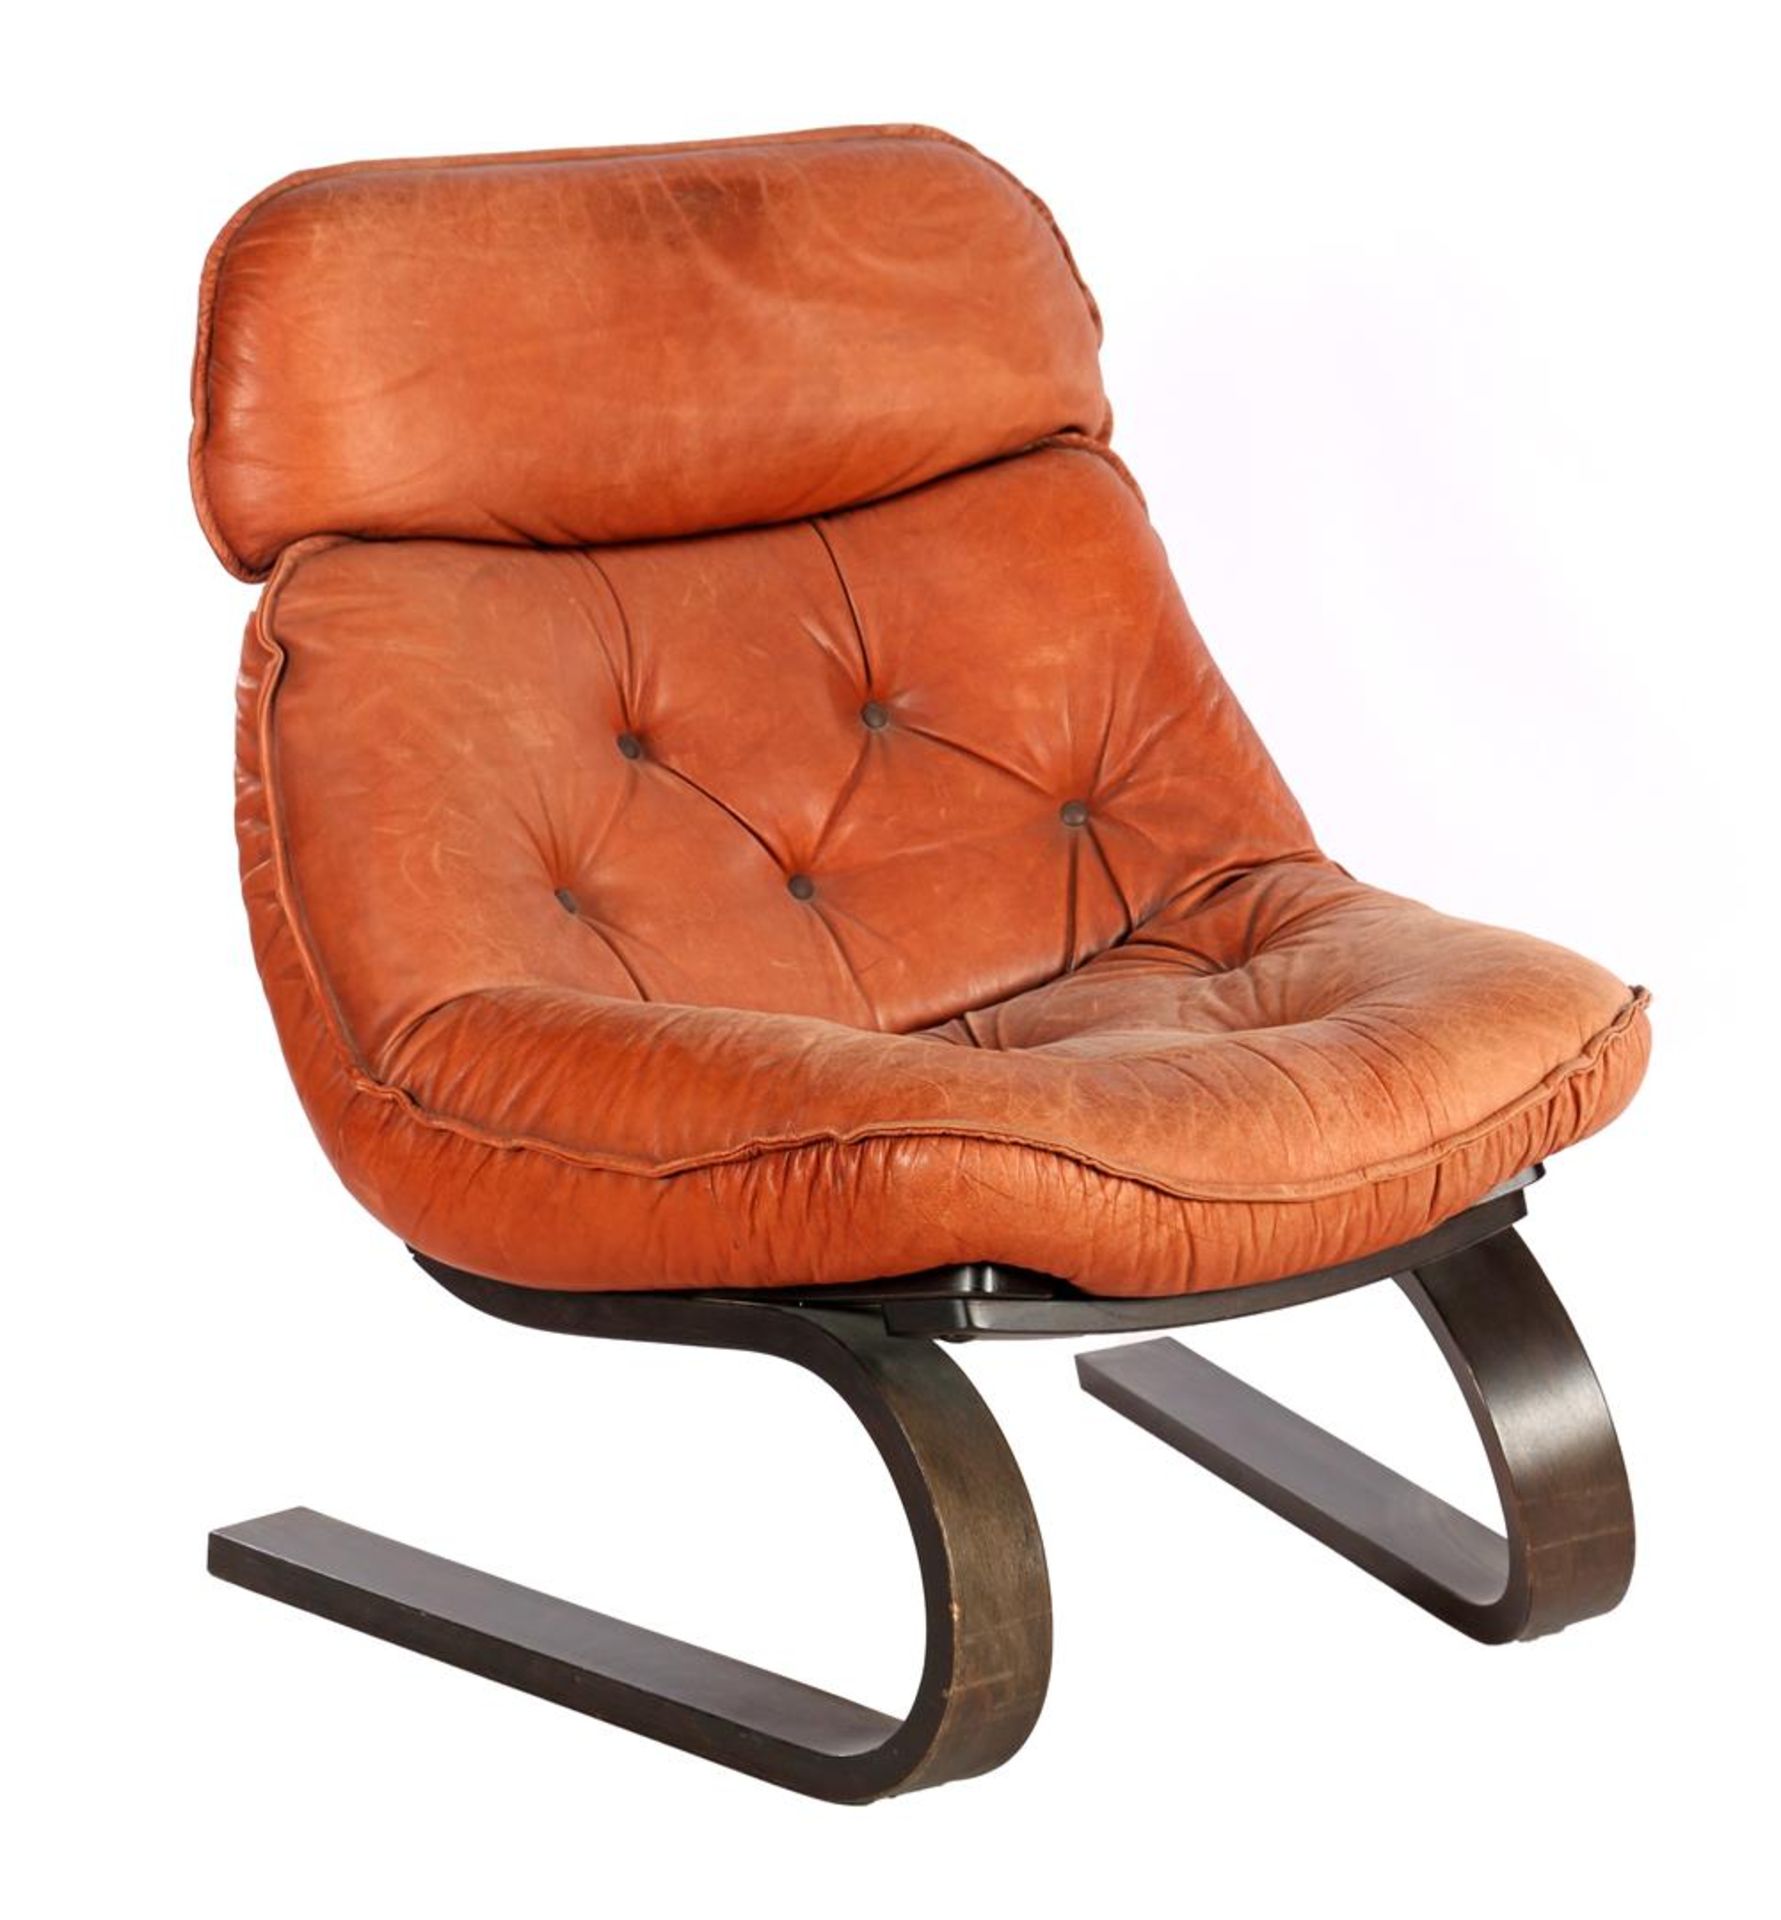 Unknown designer, brown leather padded lounge chair